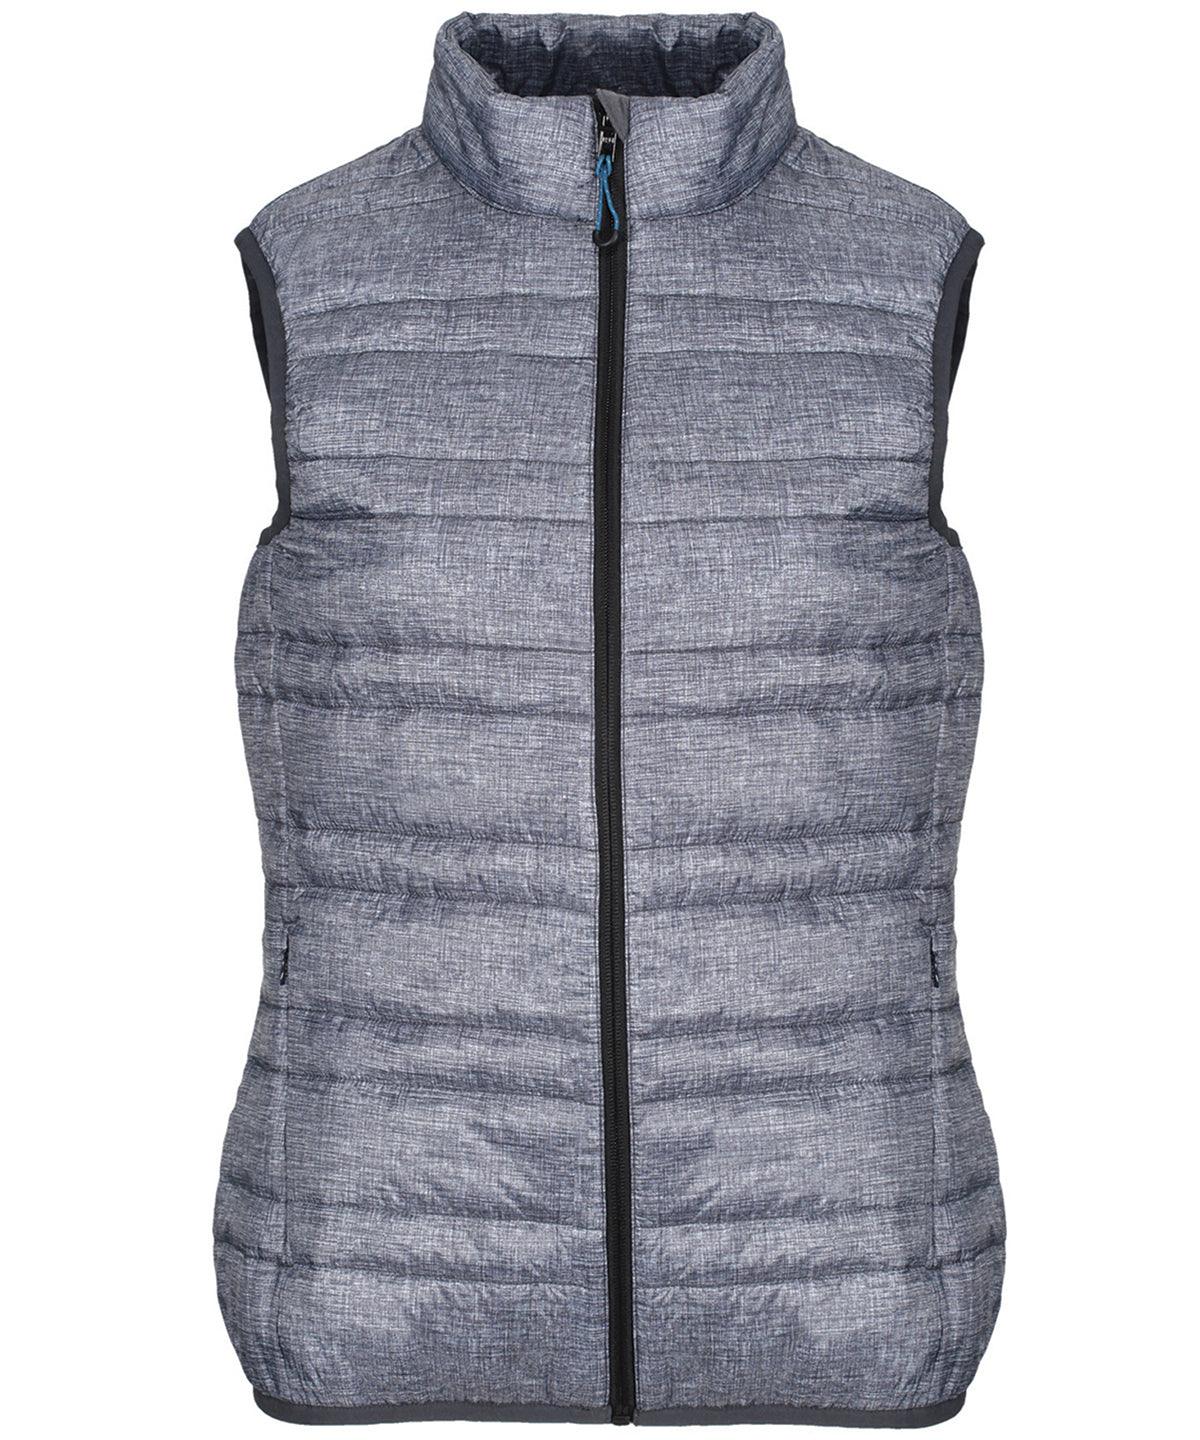 Grey Marl - Women's Firedown down-touch bodywarmer Body Warmers Regatta Professional Gilets and Bodywarmers, Jackets & Coats, New Colours for 2021, Plus Sizes, Rebrandable Schoolwear Centres